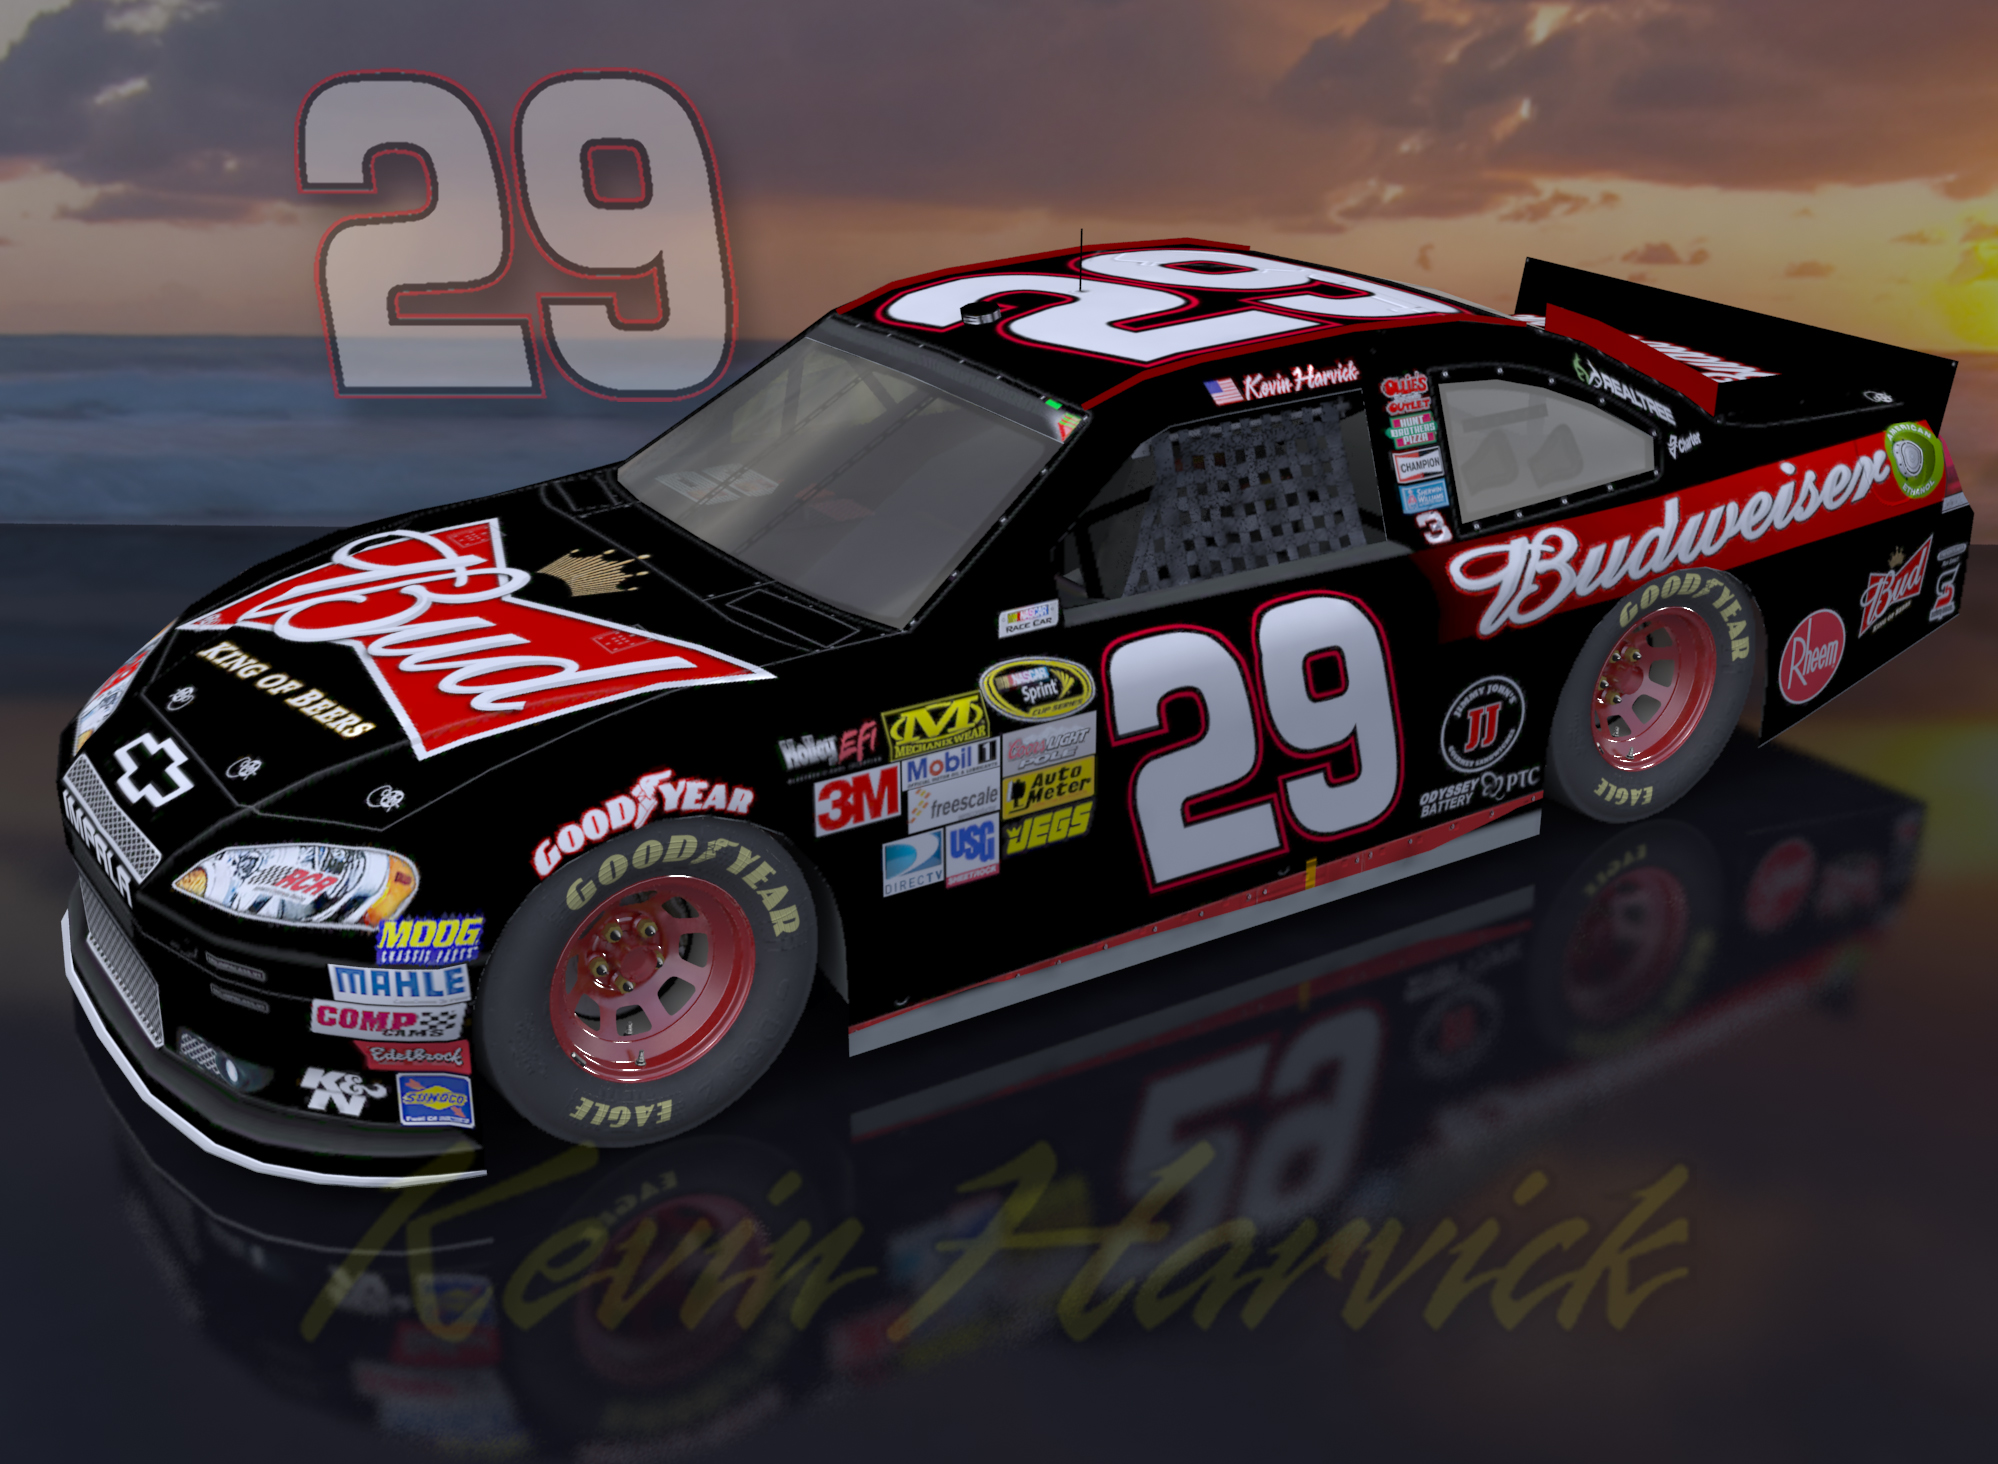 Kevin Harvick Budweiser Sunset Outdoors Wallpaper With A Beach